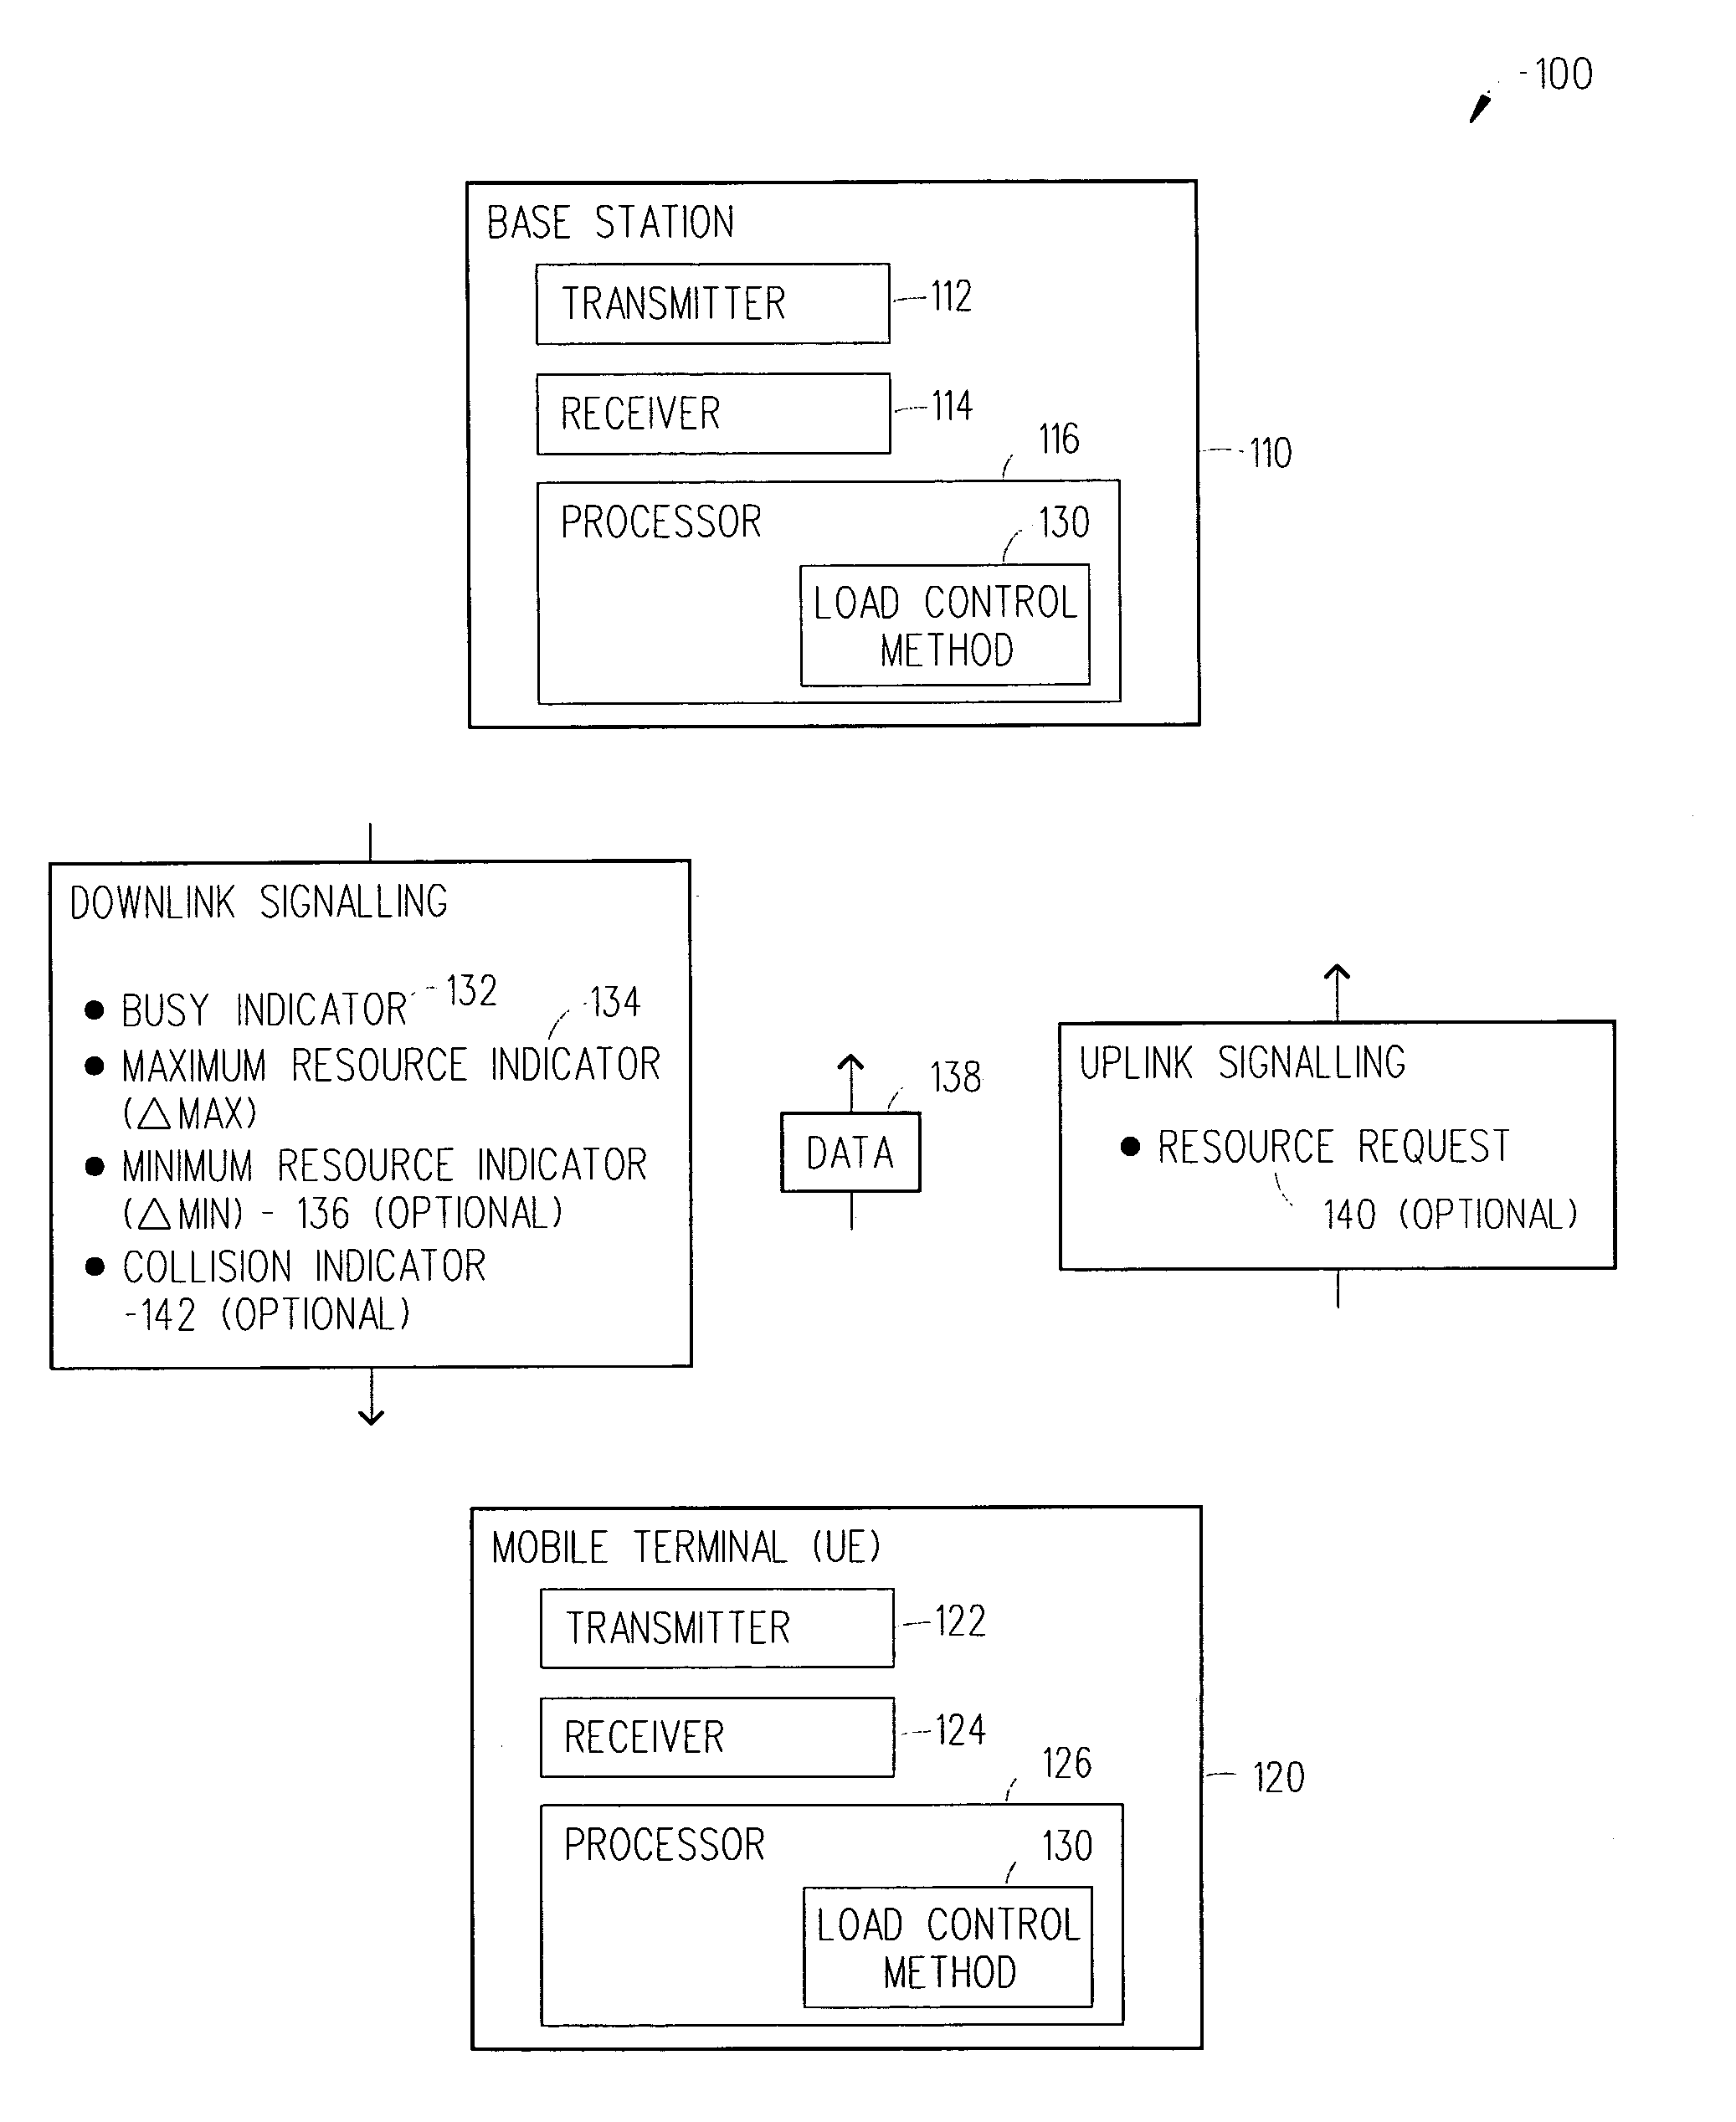 Load control in shared medium many-to-one communication systems